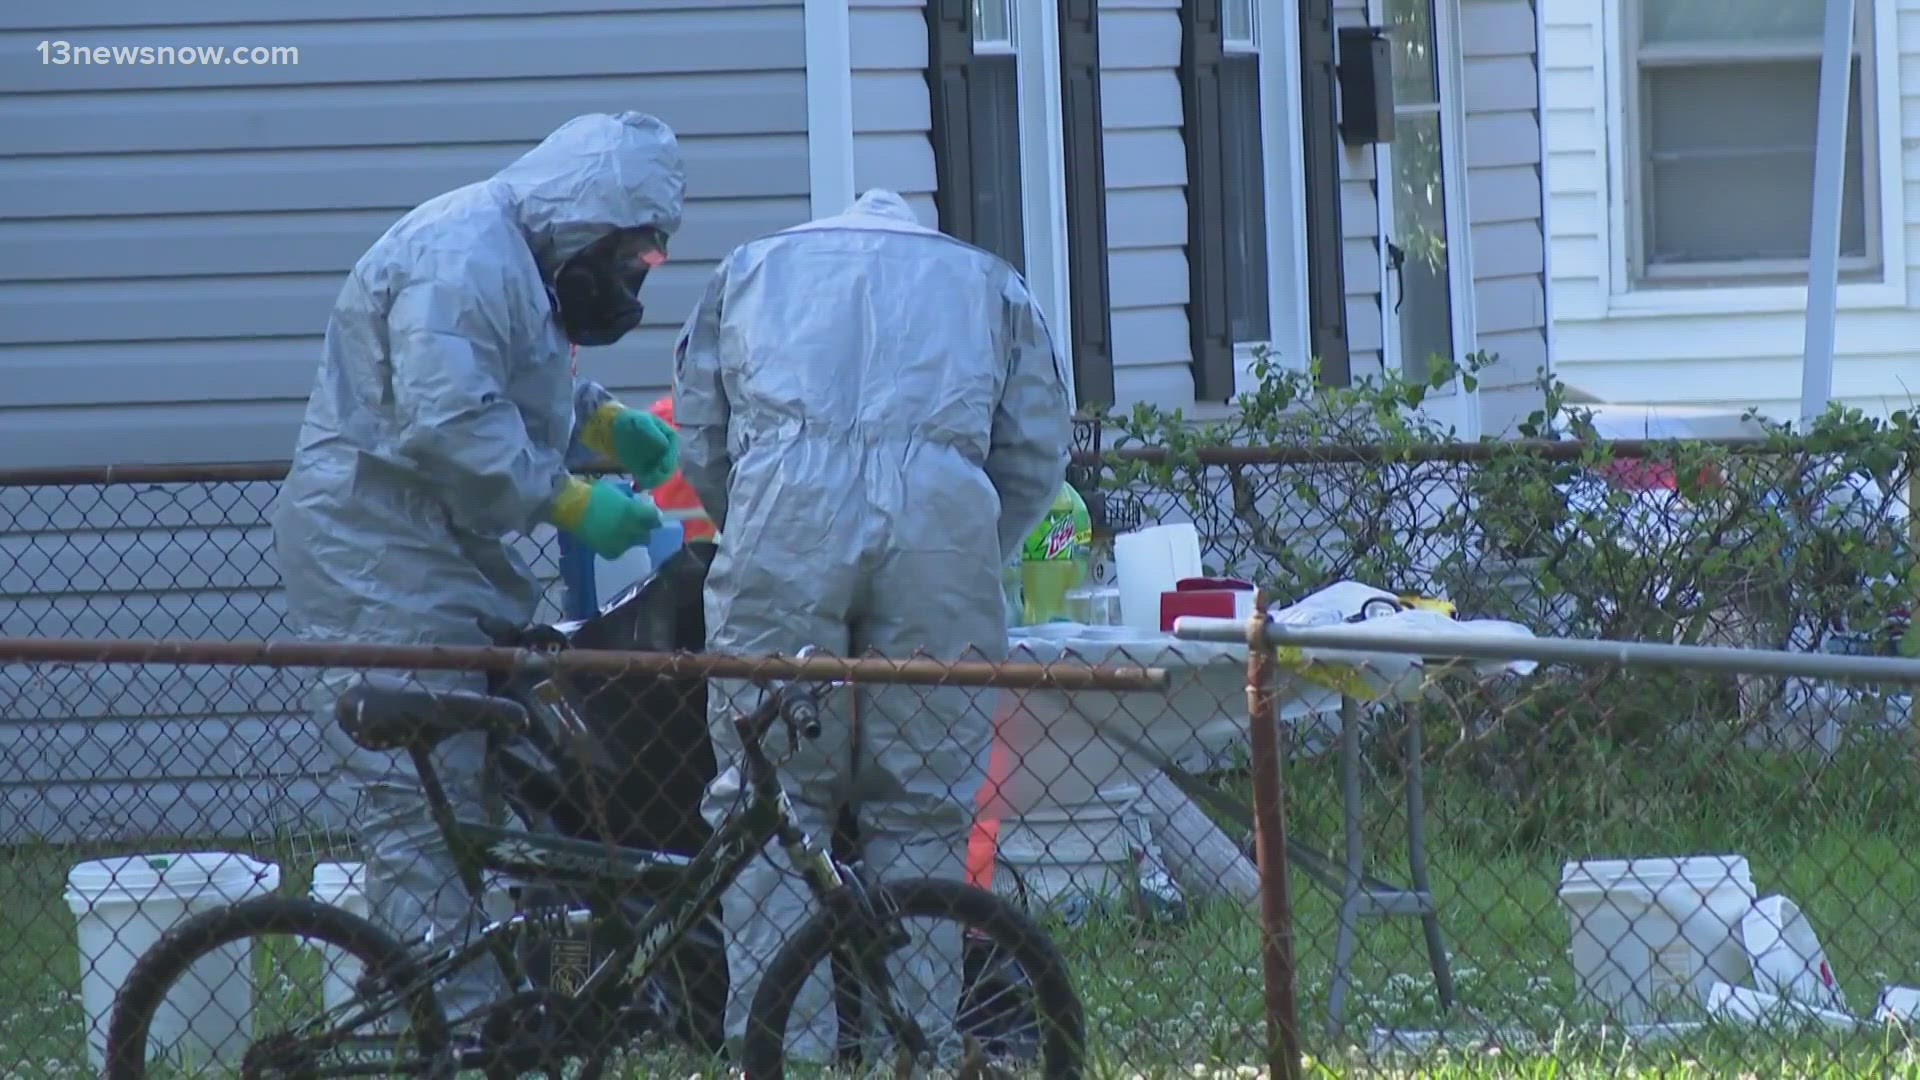 In Hampton, police say what initially started as a medical call on Grimes Road turned into the discovery of a man's body and materials to make meth.